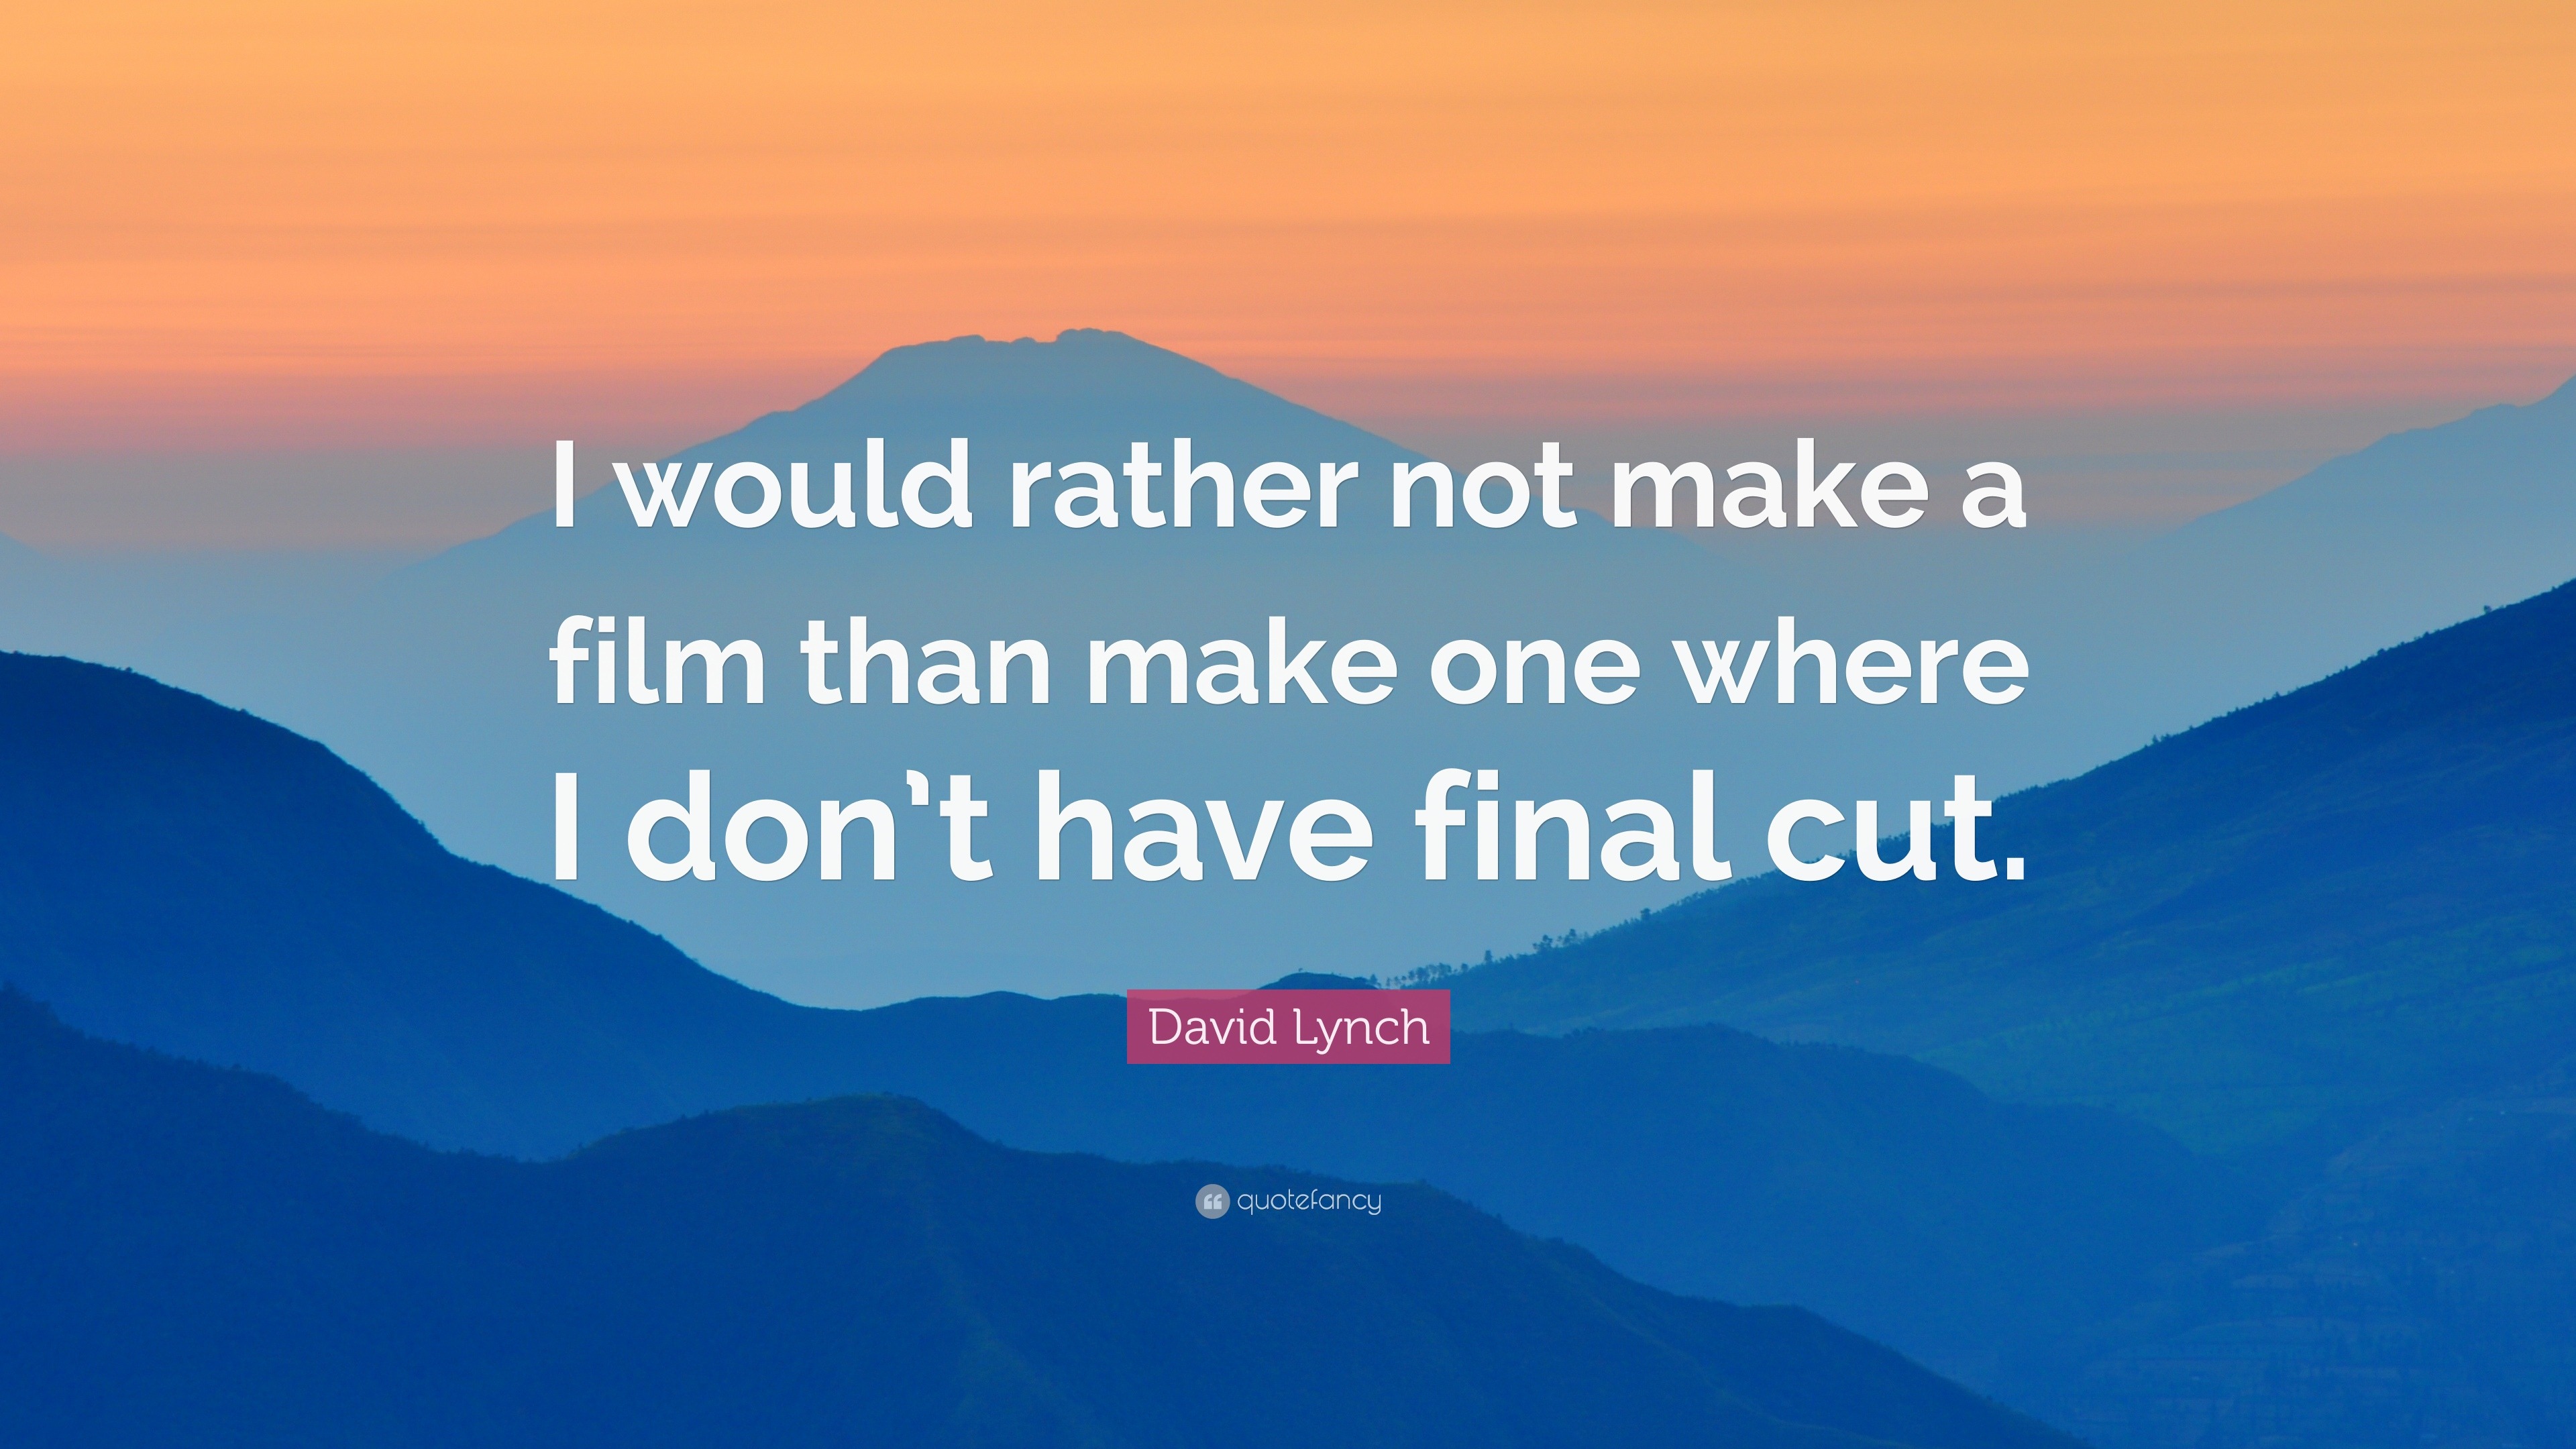 David Lynch Quote: “I would rather not make a film than make one where I  don'